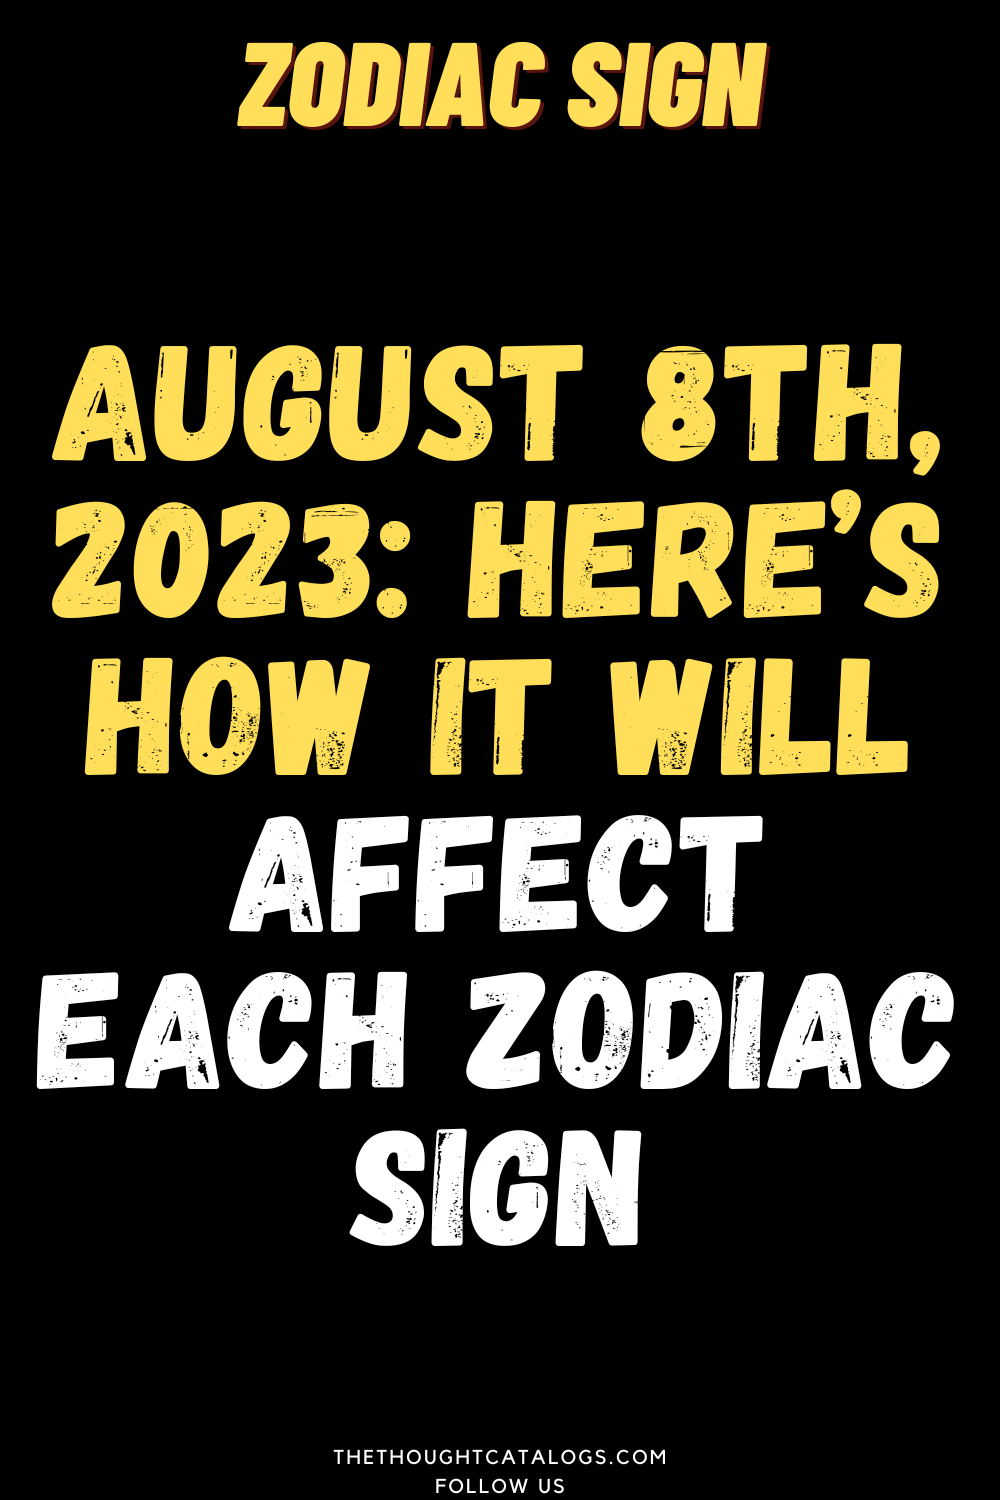 August 8th, 2023: Here’s How It Will Affect Each Zodiac Sign